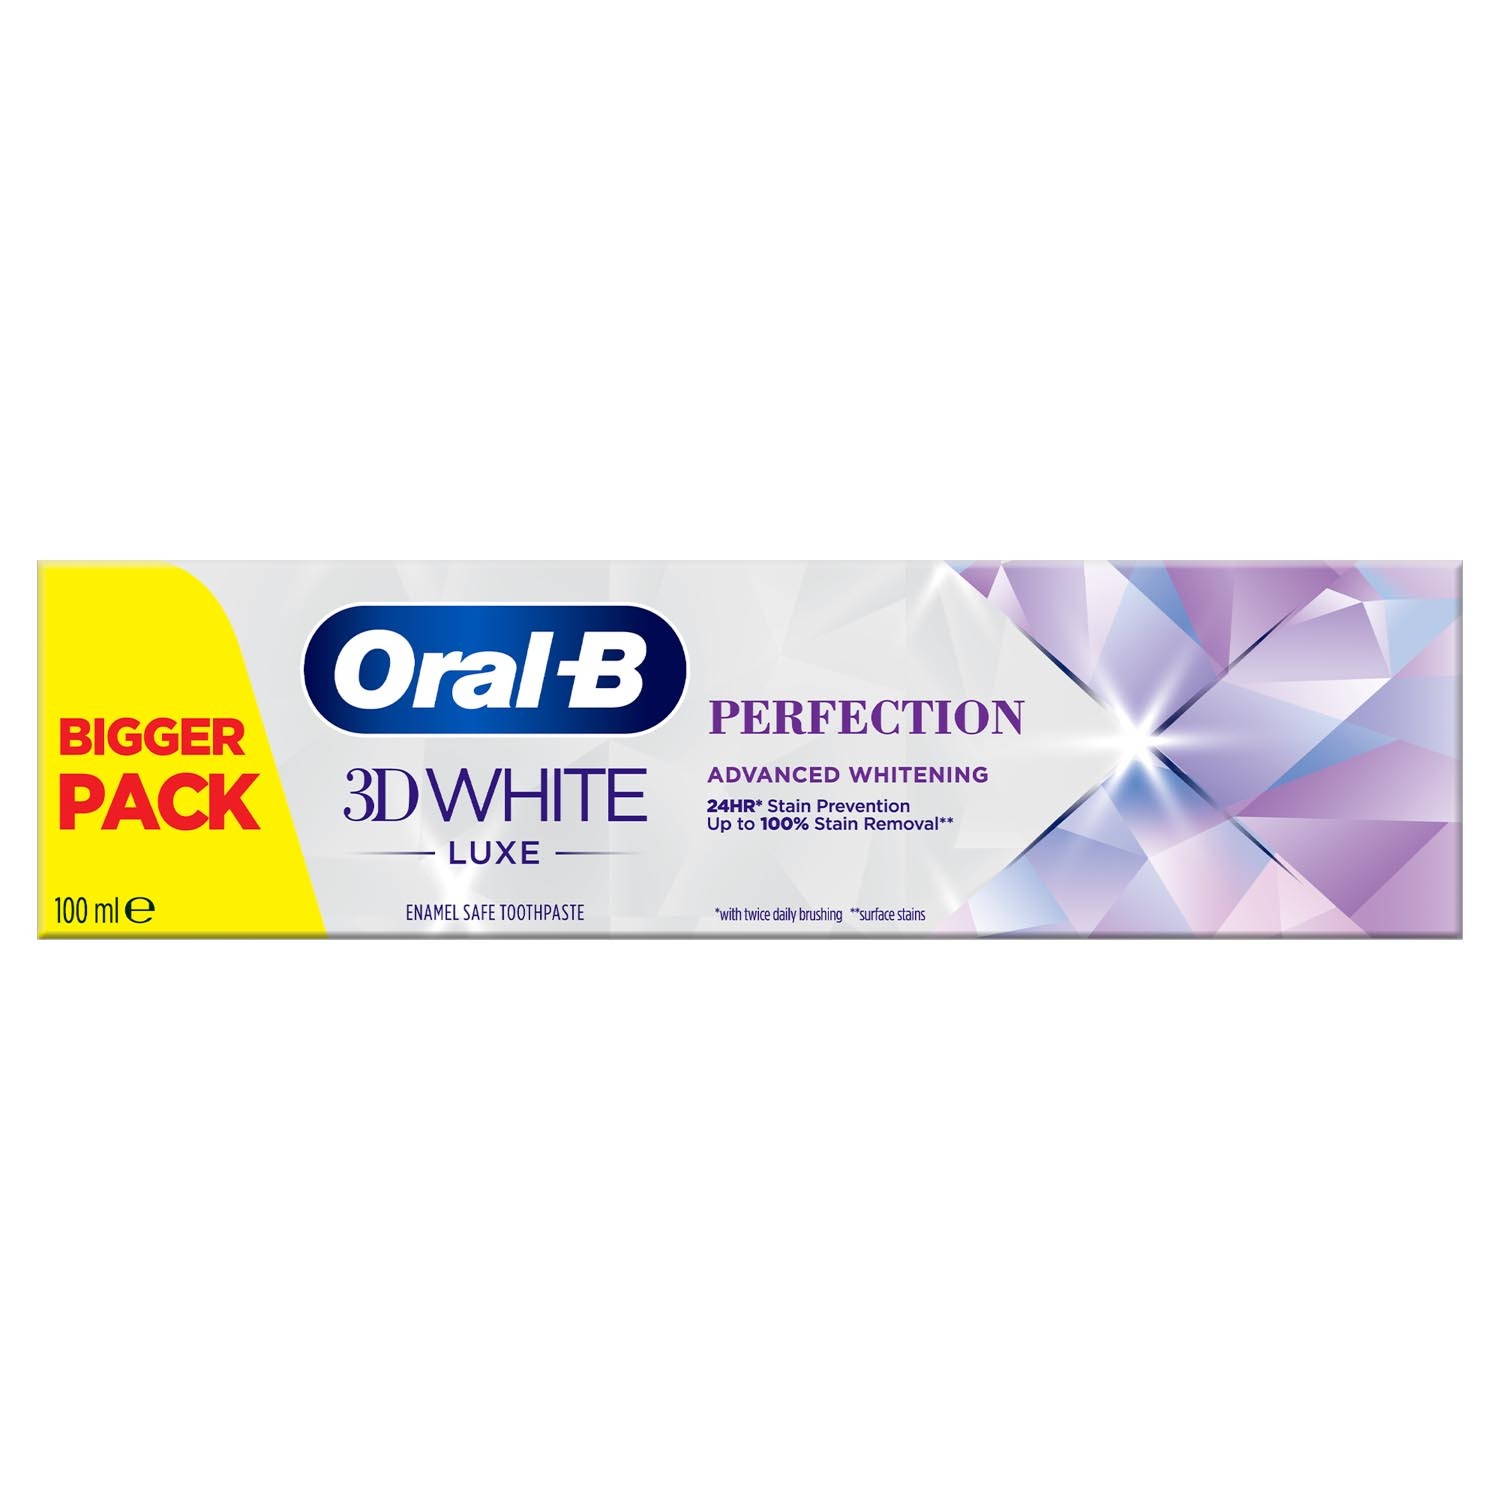 Oral-B 3D White Luxe Perfection Toothpaste 100ml Image